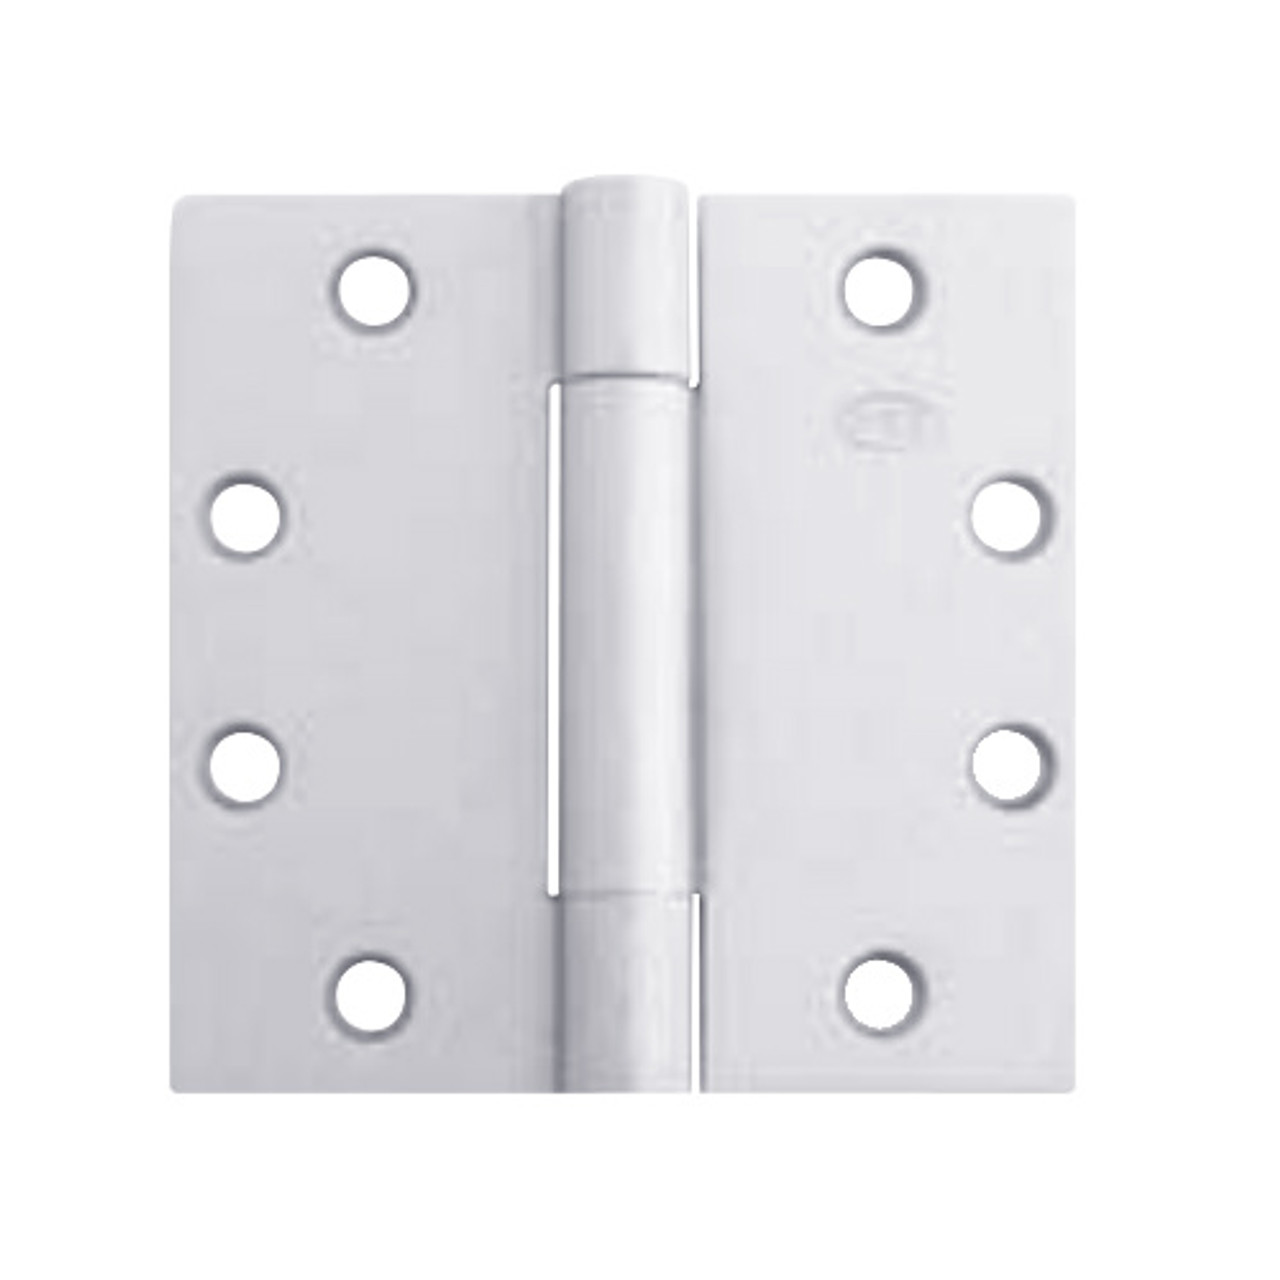 3CB1WT-4-5x5-651 IVES 3 Knuckle Concealed Bearing Full Mortise Wide Throw Butt Hinge in Bright Chrome Plated